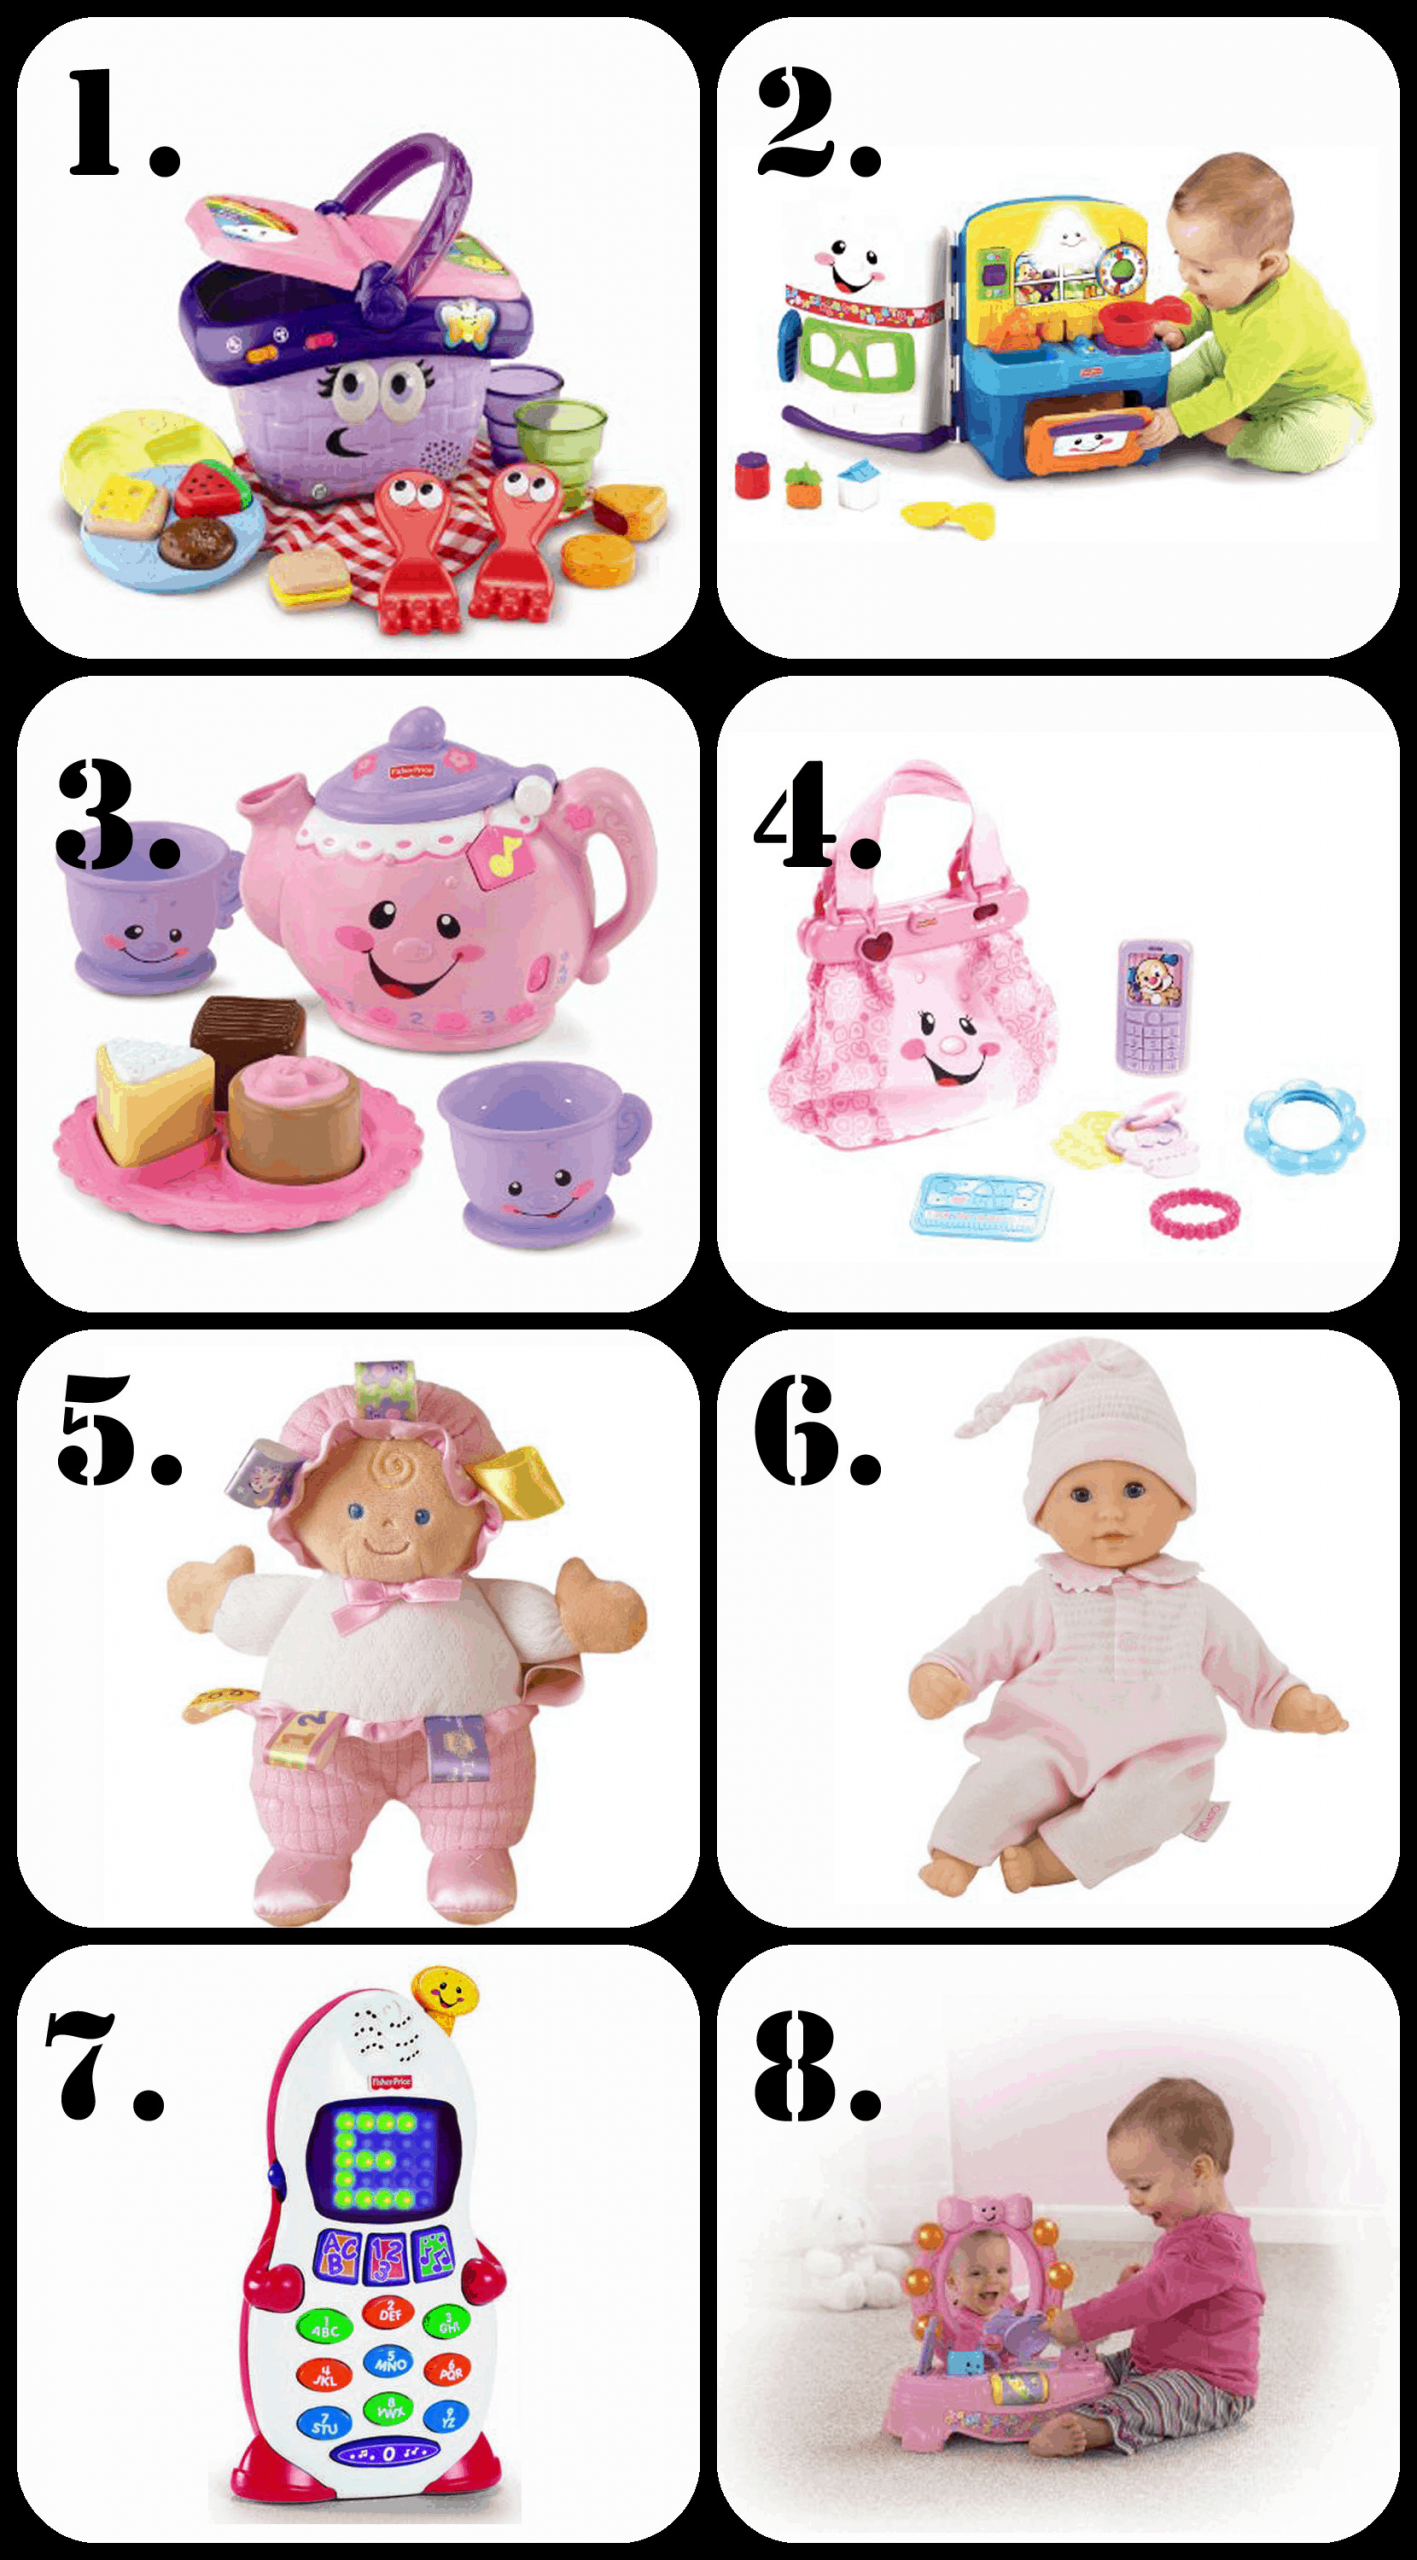 Birthday Gift For One Year Old
 The Ultimate List of Gift Ideas for a 1 Year Old Girl